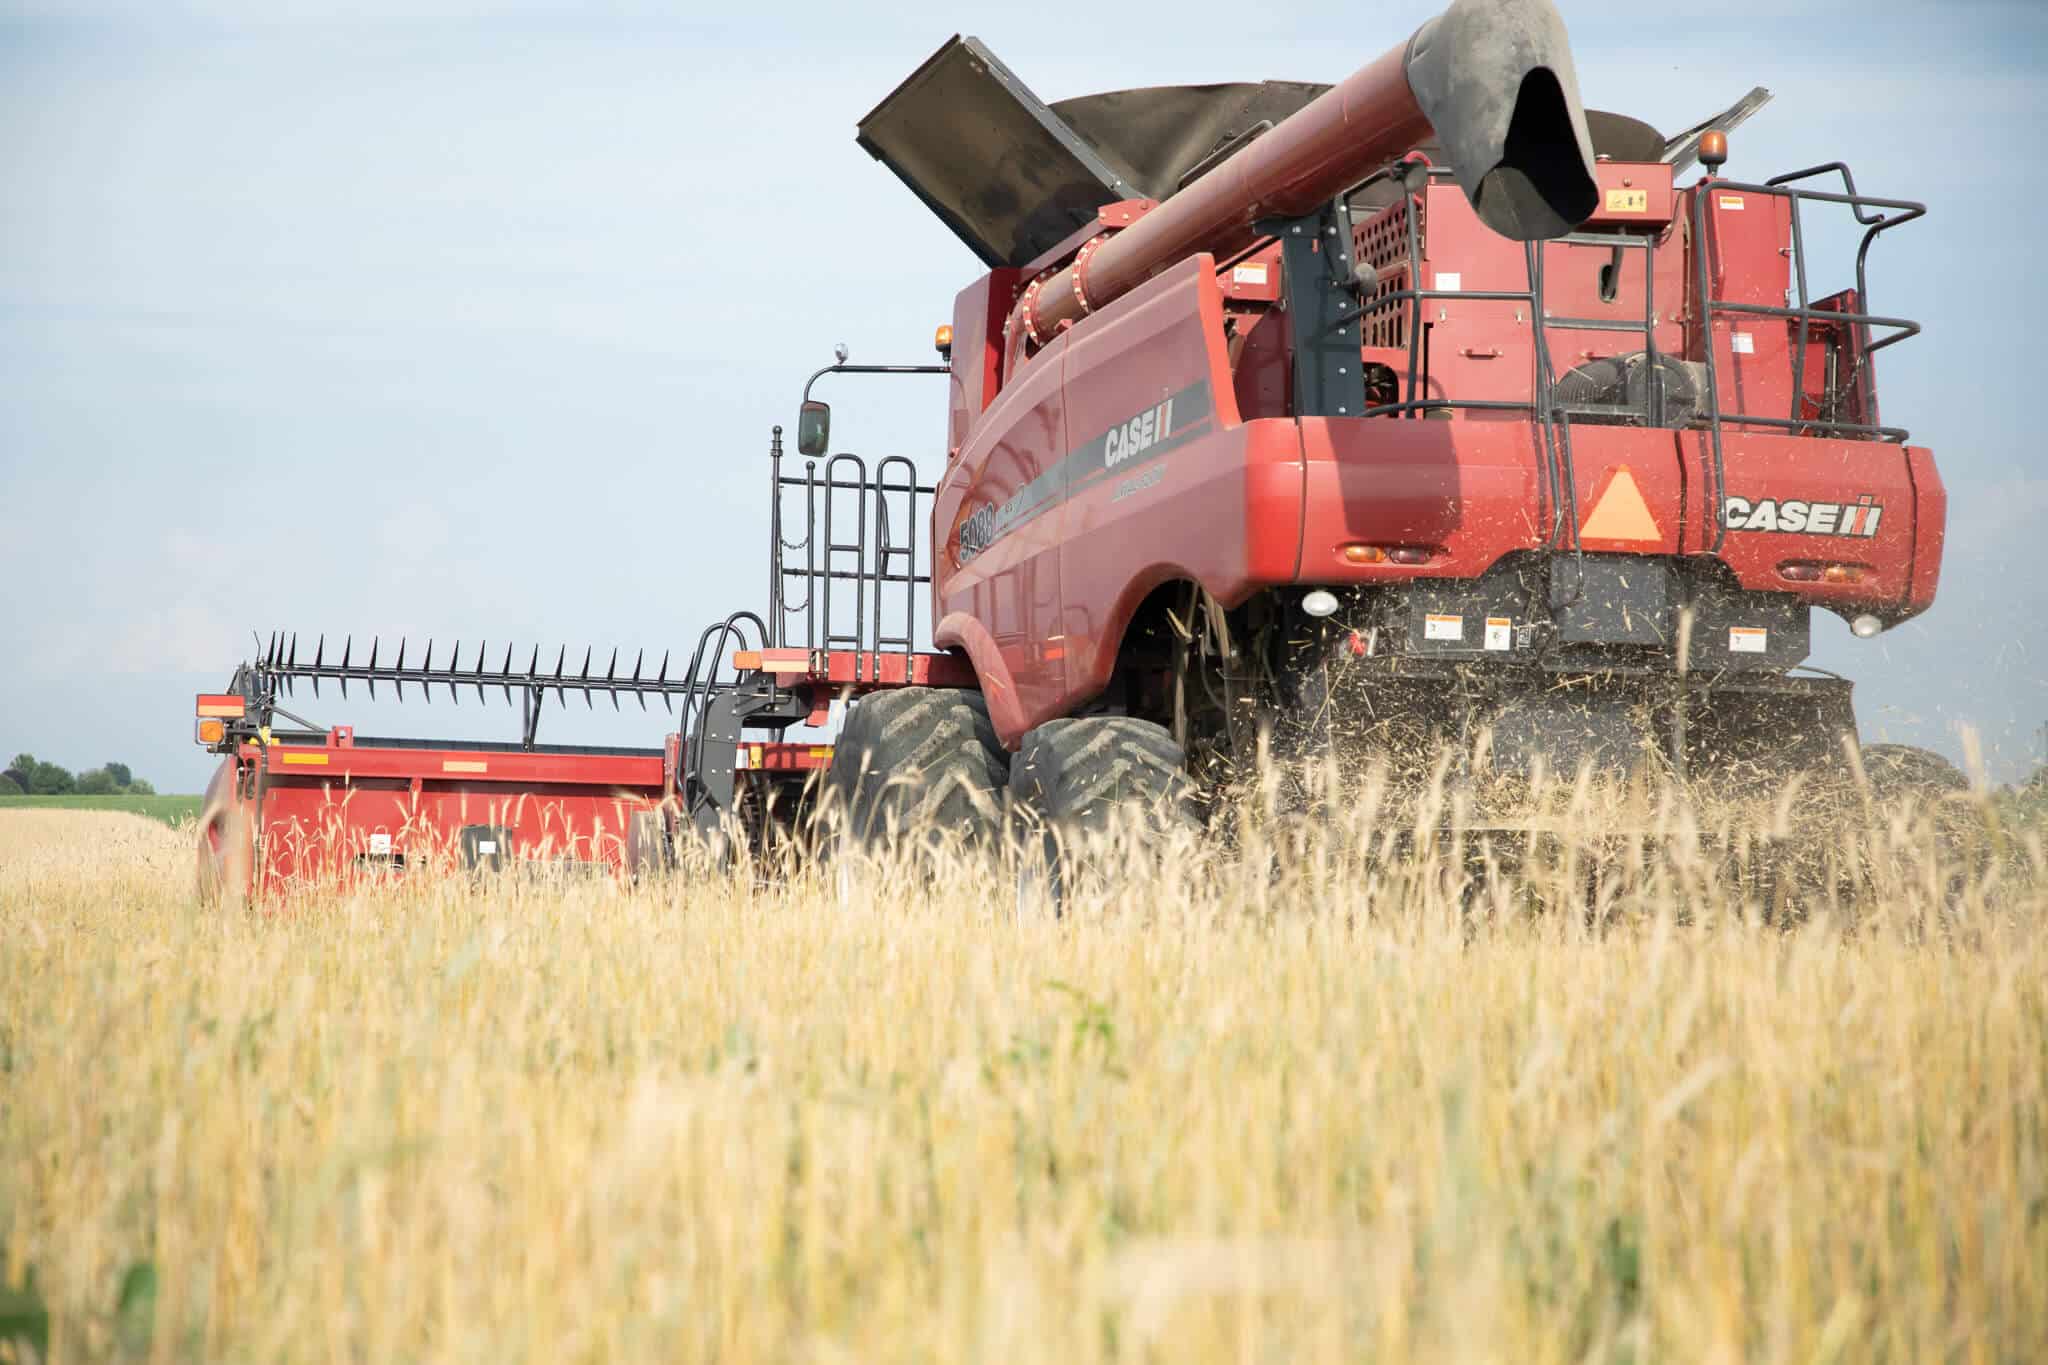 Case IH combine harvesting cover crops on the farm in Southeast , Iowa.